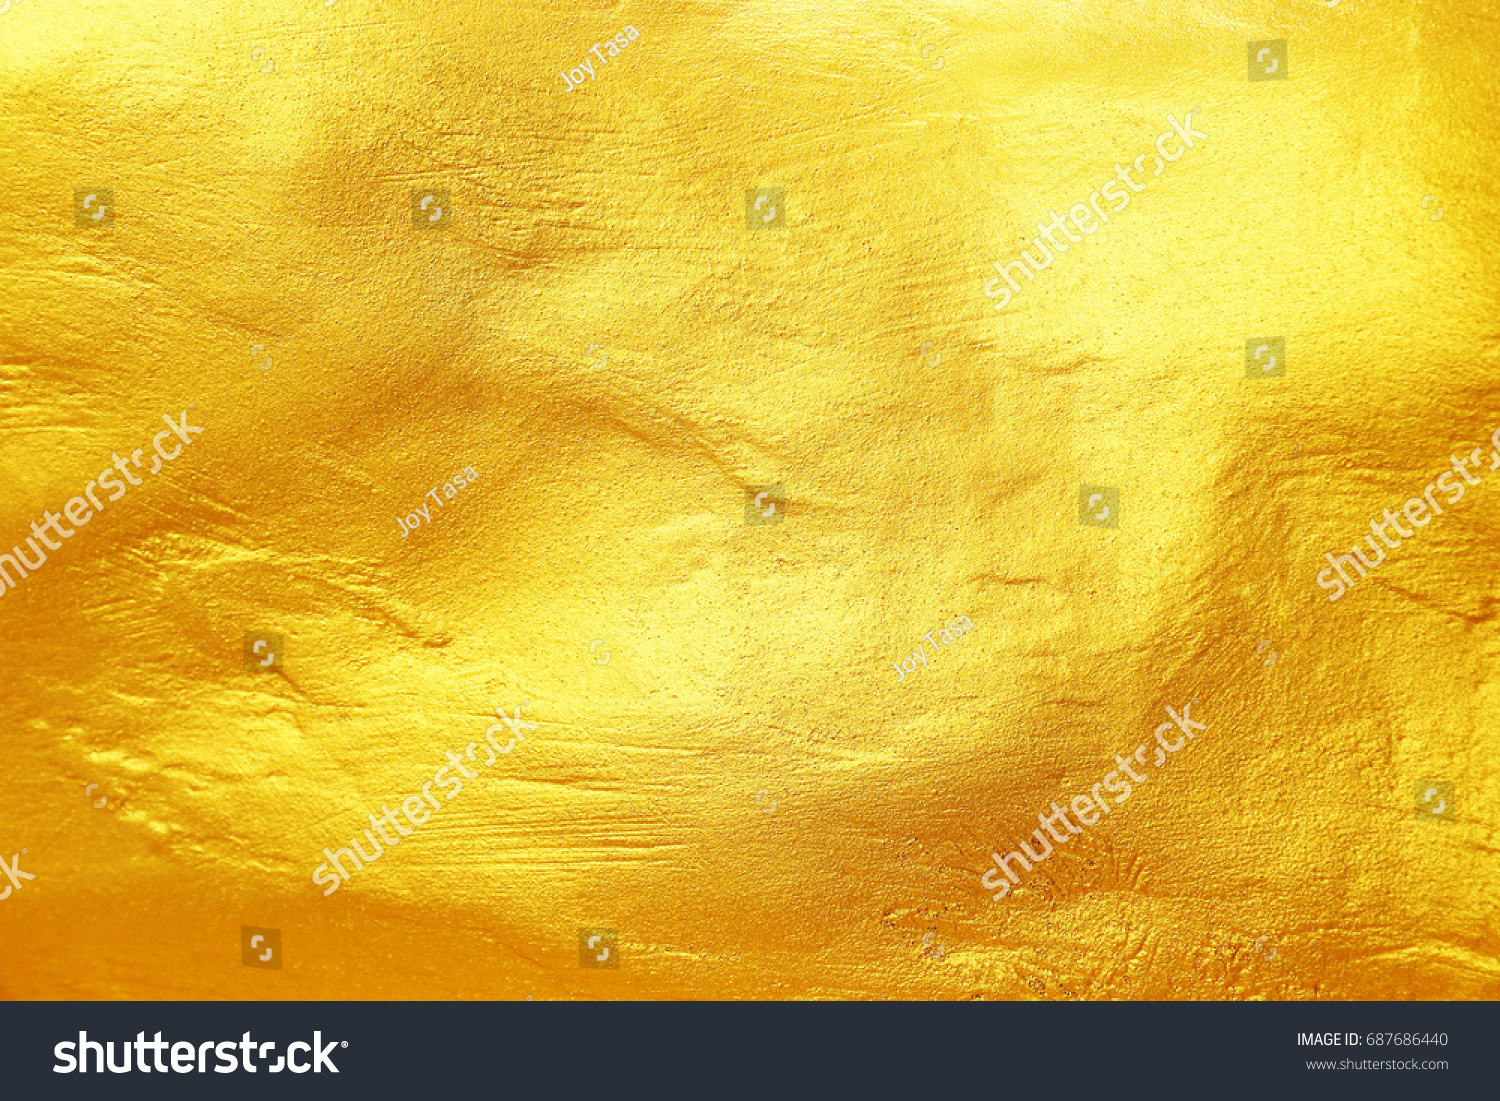 it is shiny gold texture background for design. #687686440